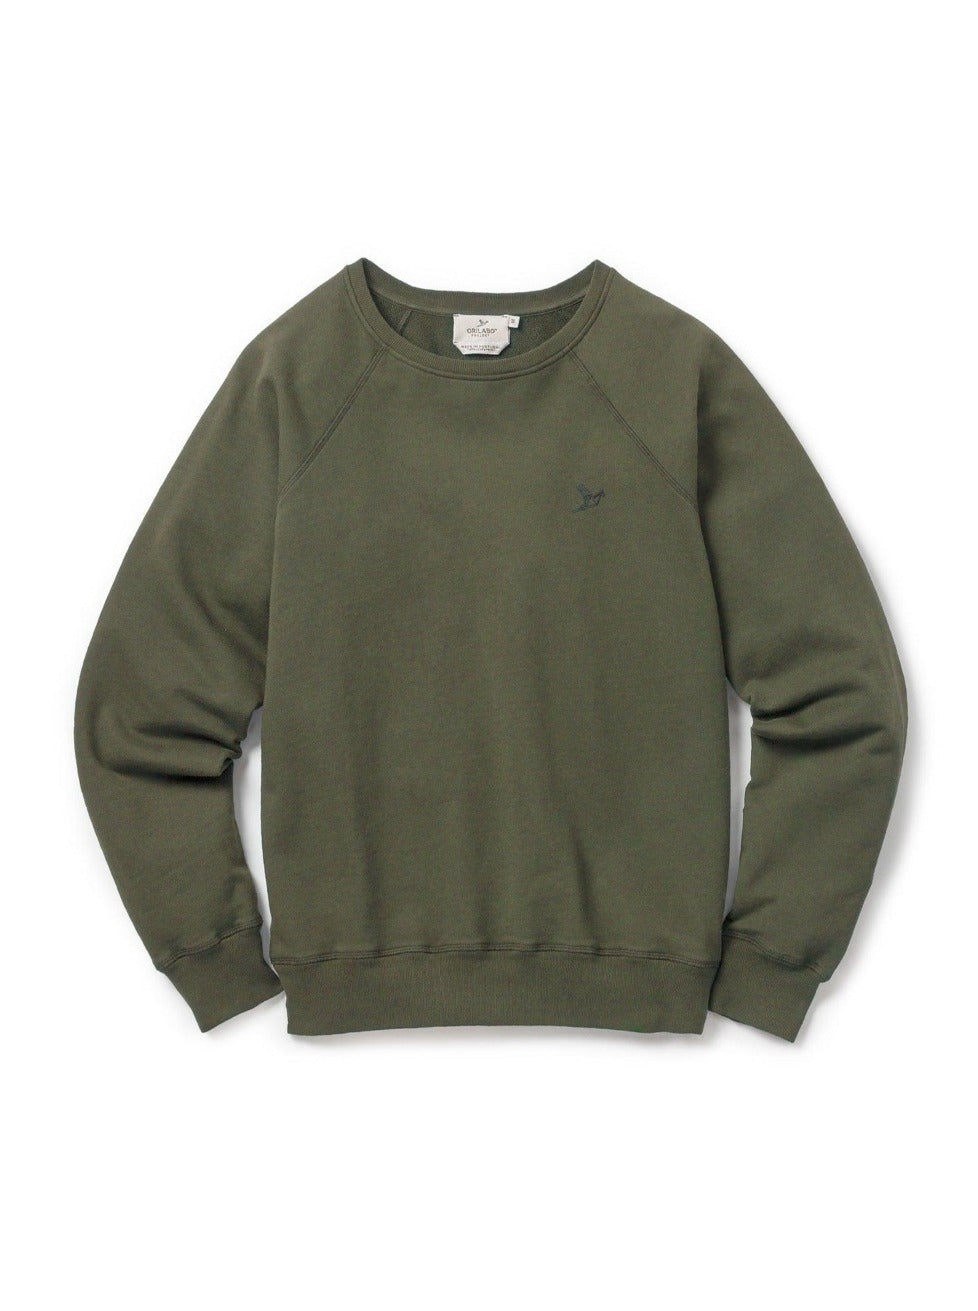 Men's ORILABO Mid-weight Terry Crewneck - Olive - ORILABO Project